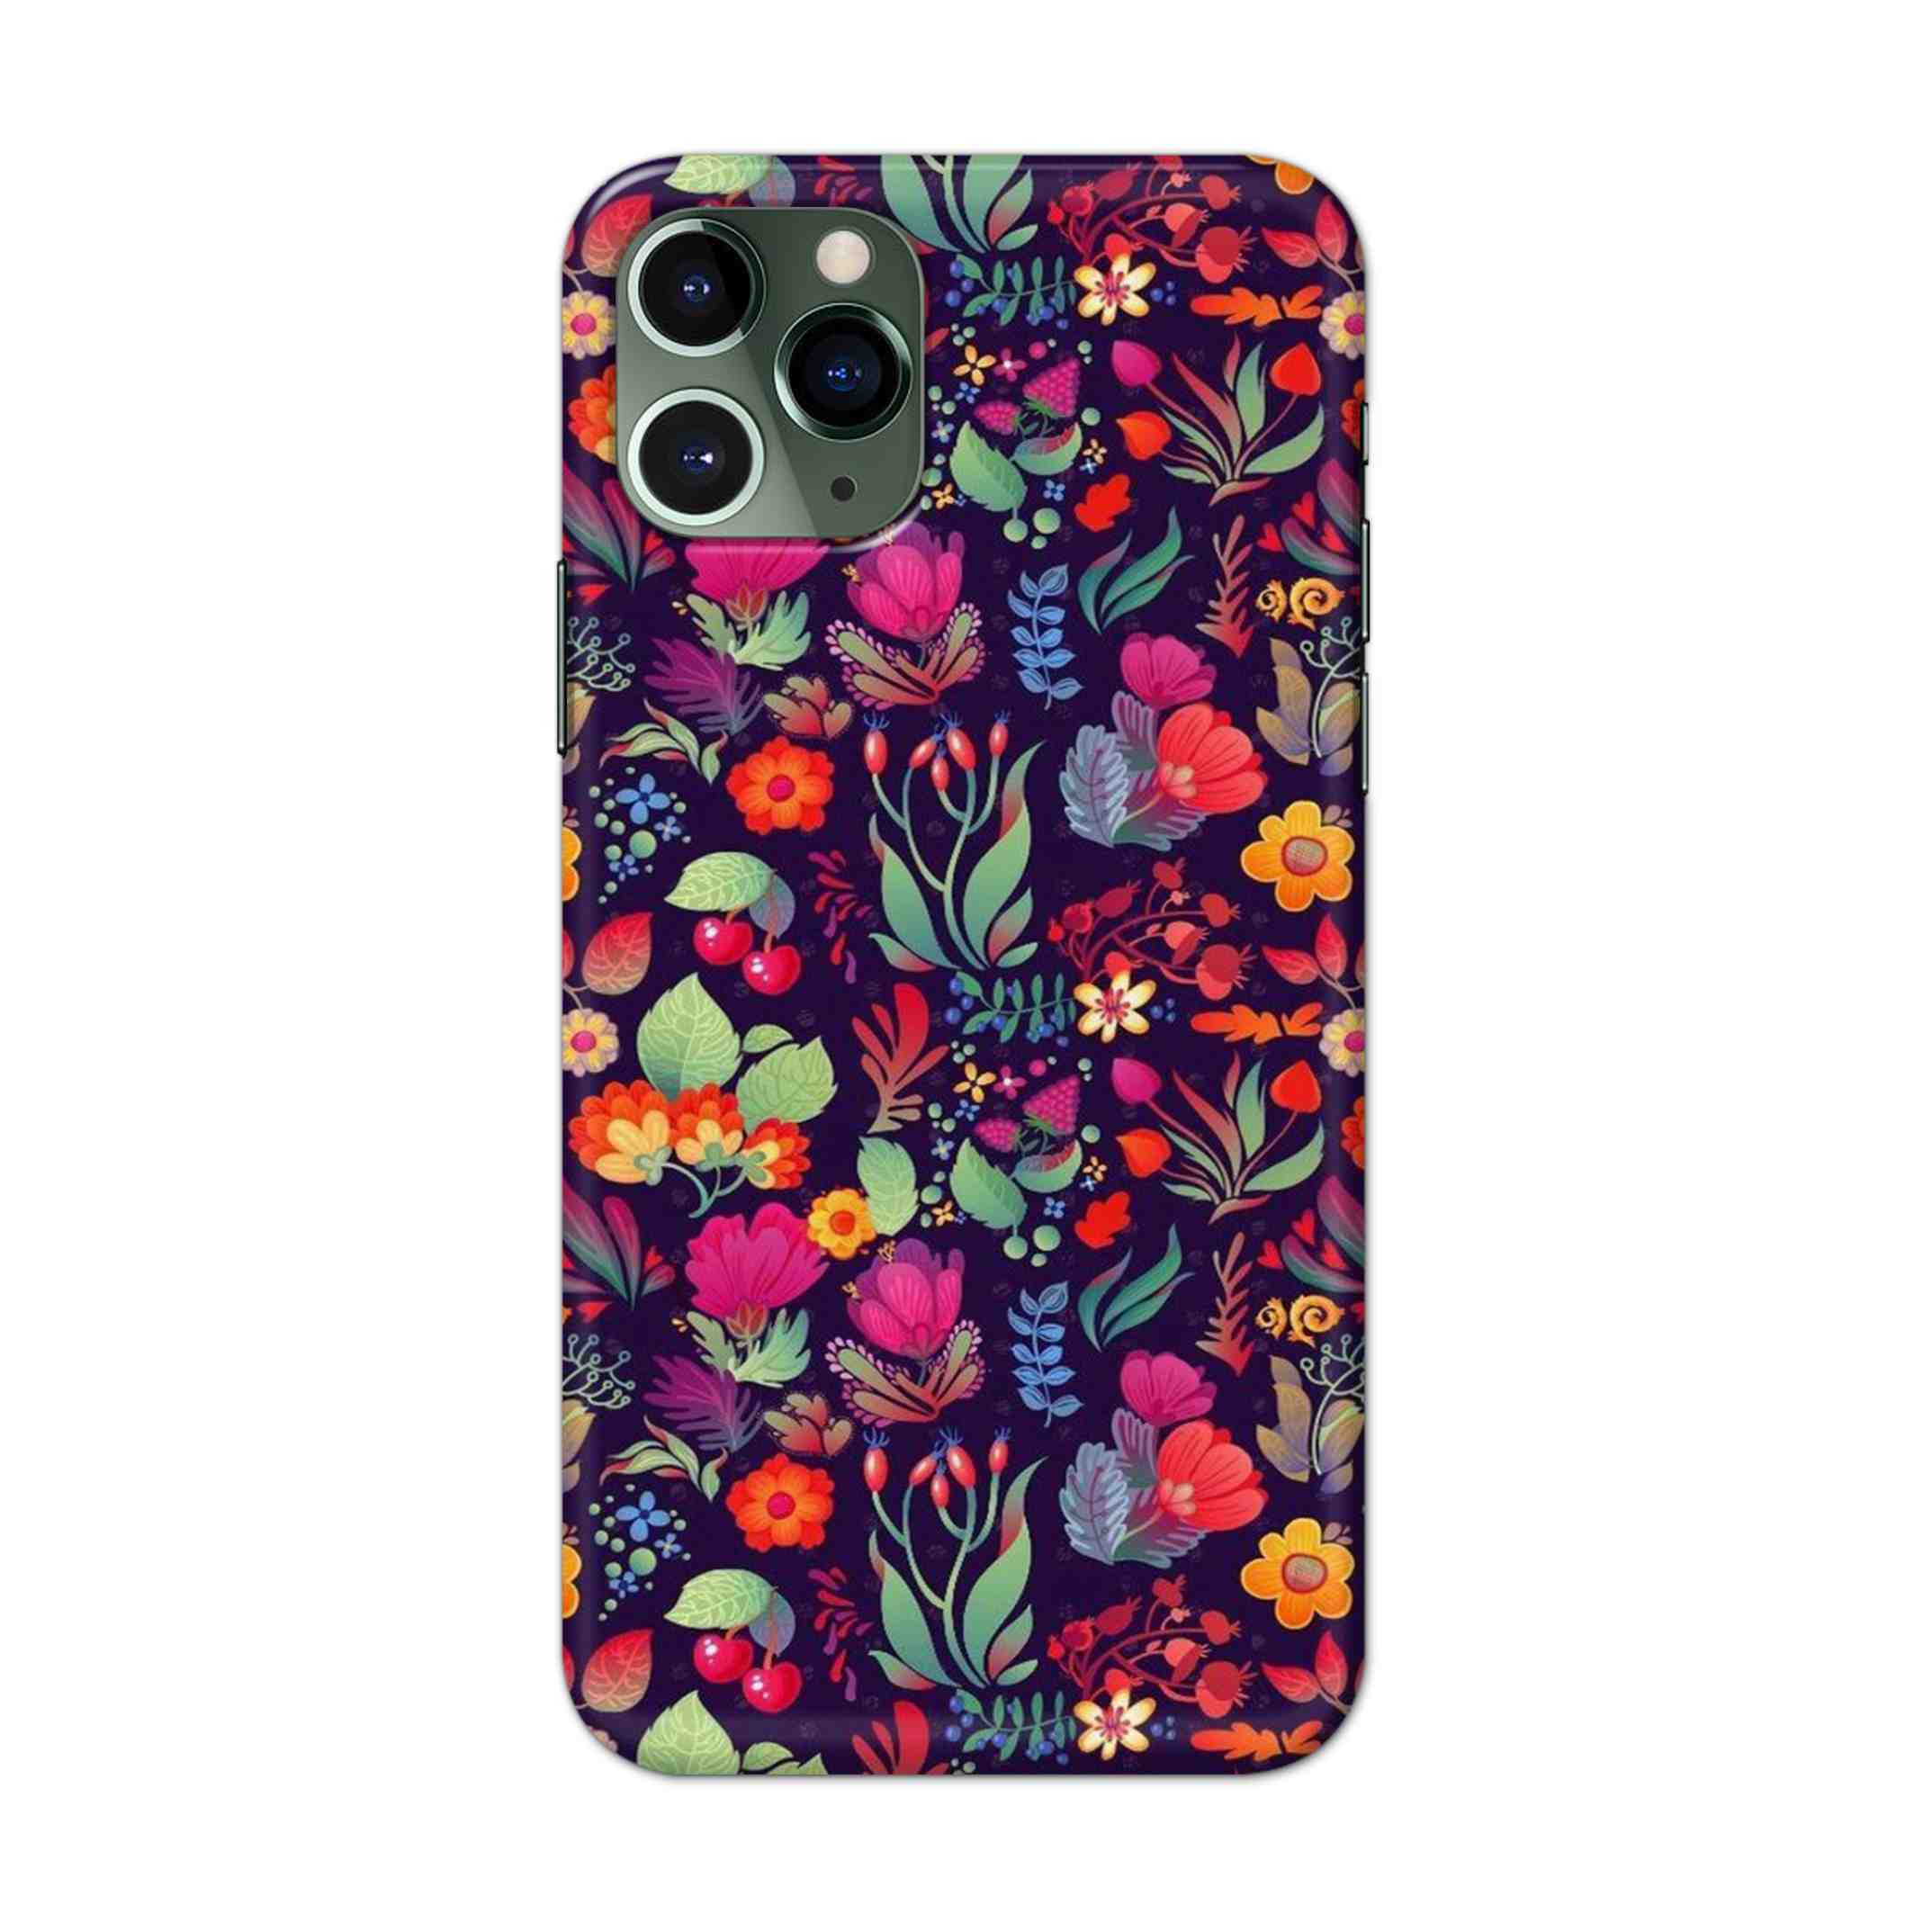 Buy Fruits Flower Hard Back Mobile Phone Case/Cover For iPhone 11 Pro Online